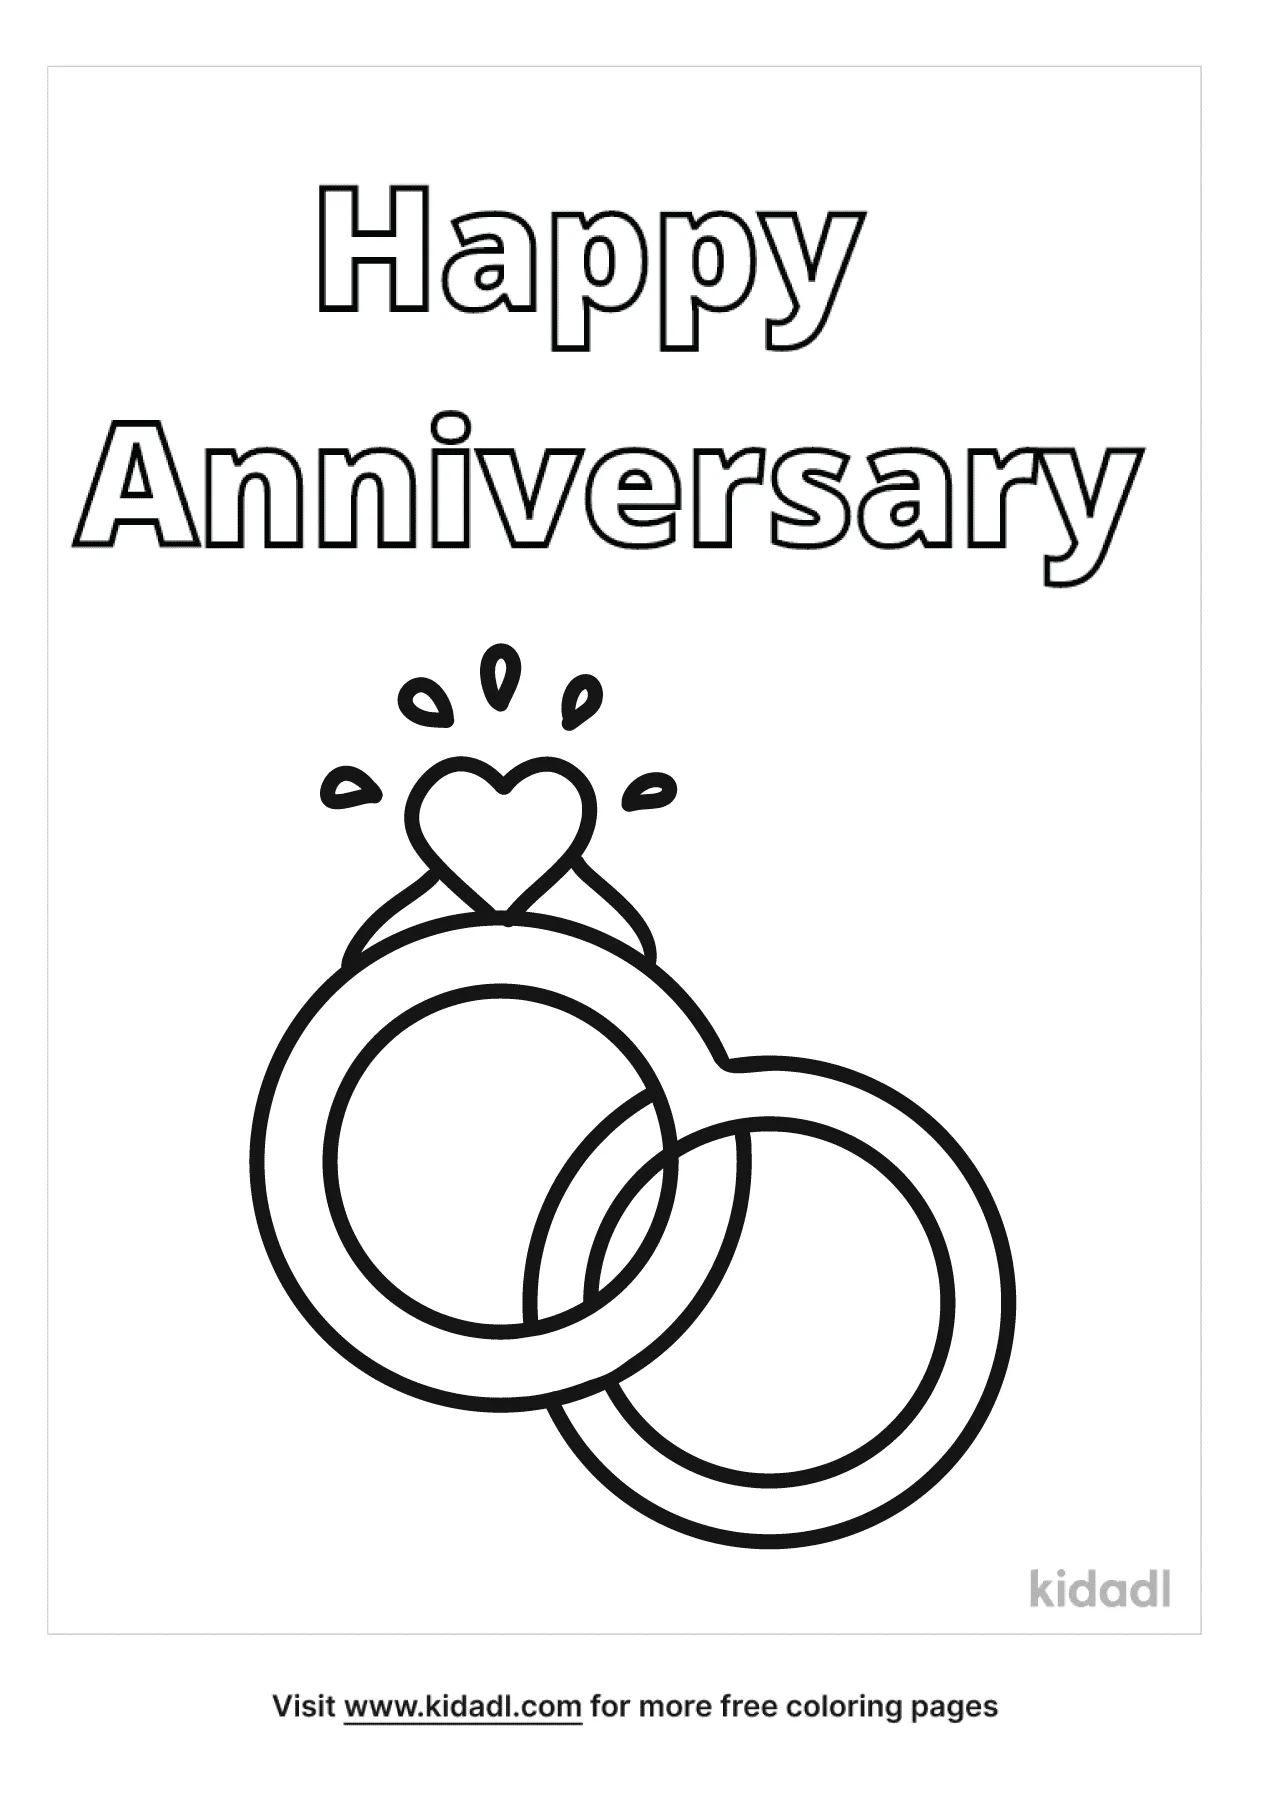 21-elegant-collection-happy-anniversary-coloring-pages-free-engagement-anniversary-coloring